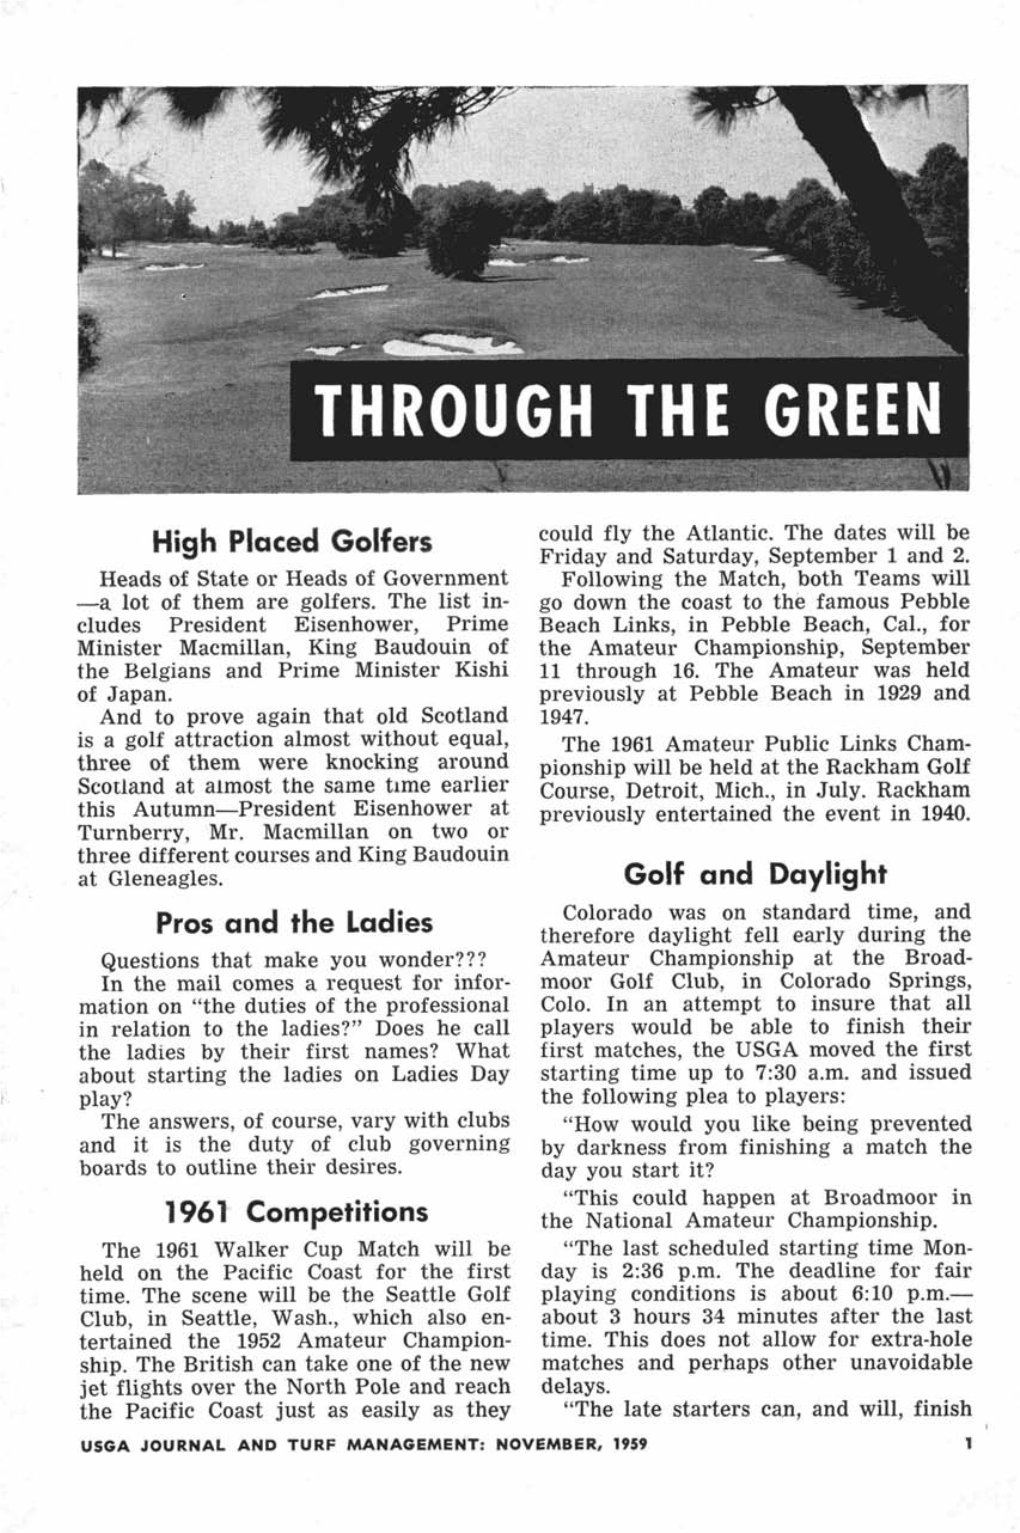 High Placed Golfers Pros and the Ladies 1961 Competitions Golf And